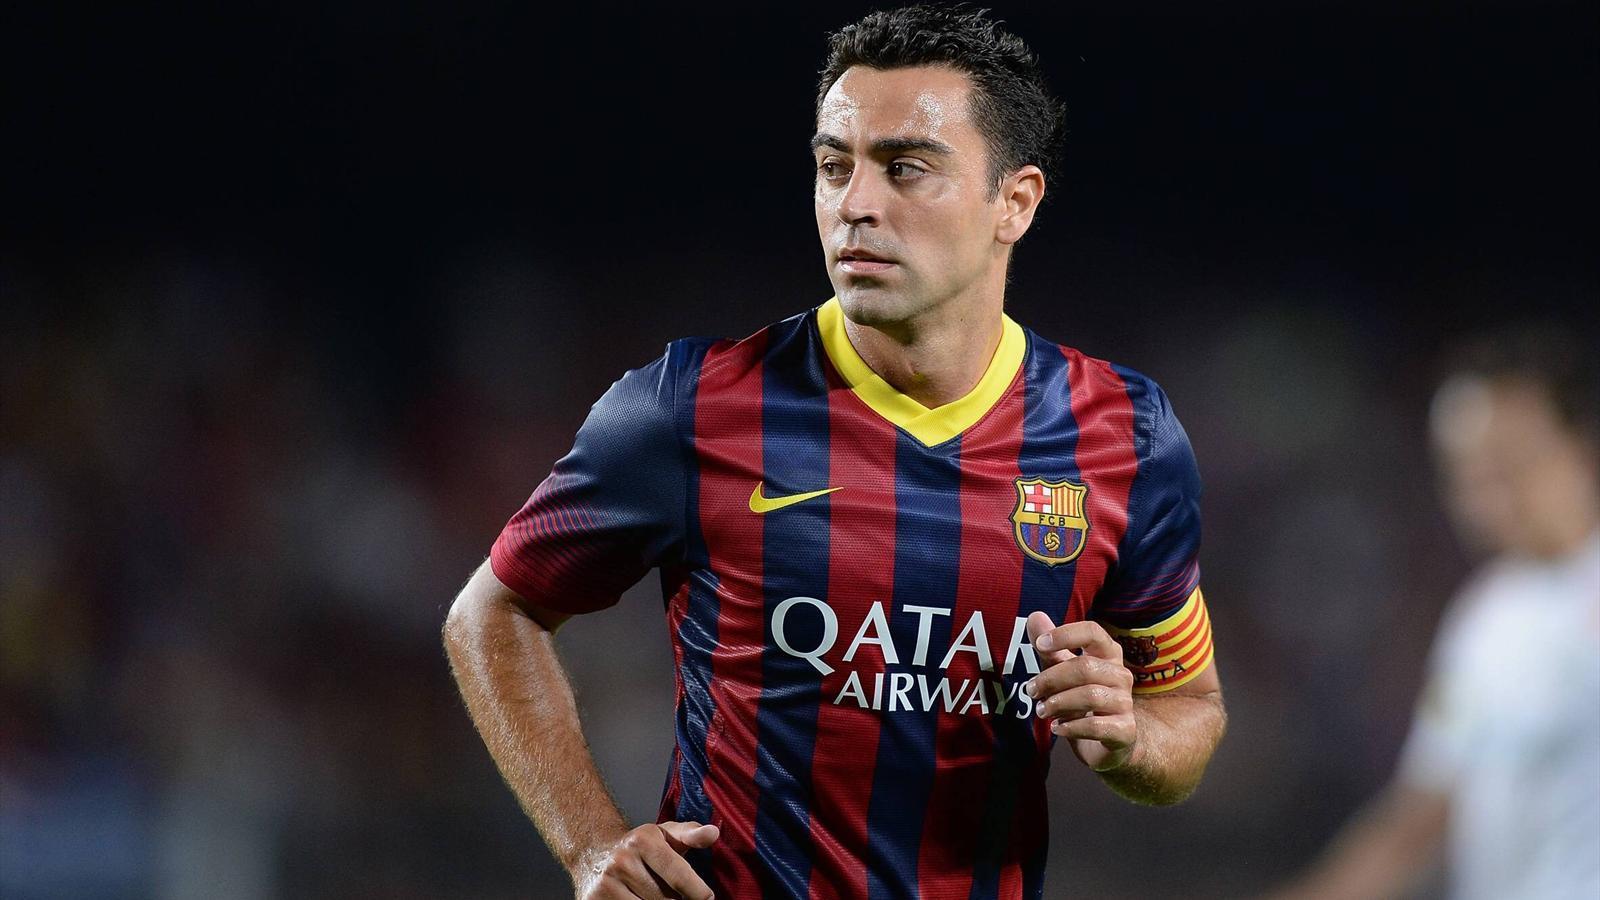 Xavi sets appearance record, Terry and Iniesta join 100 club